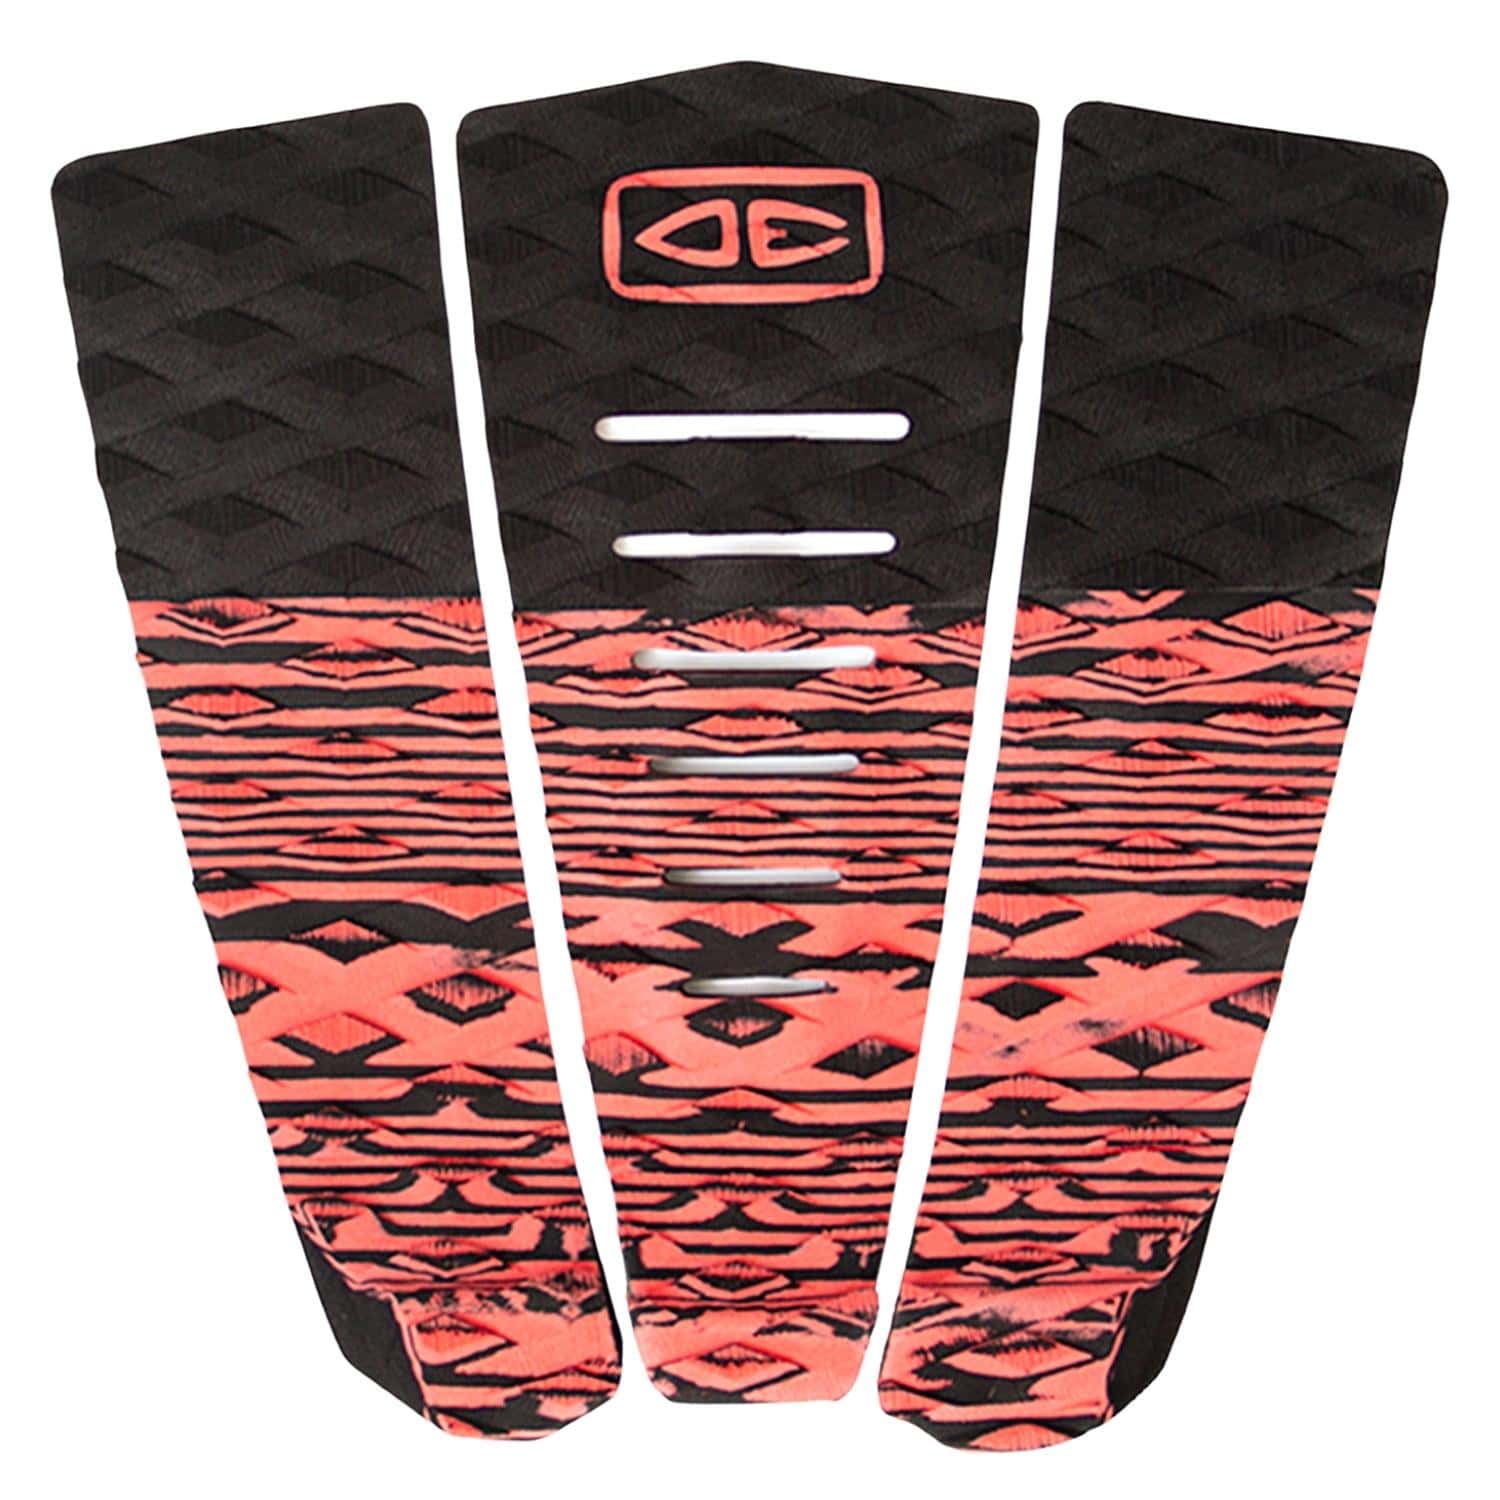 Ocean And Earth Blazed Surfboard Tail Pad - Coral/Black - 3 Piece Tail Pad by Ocean and Earth